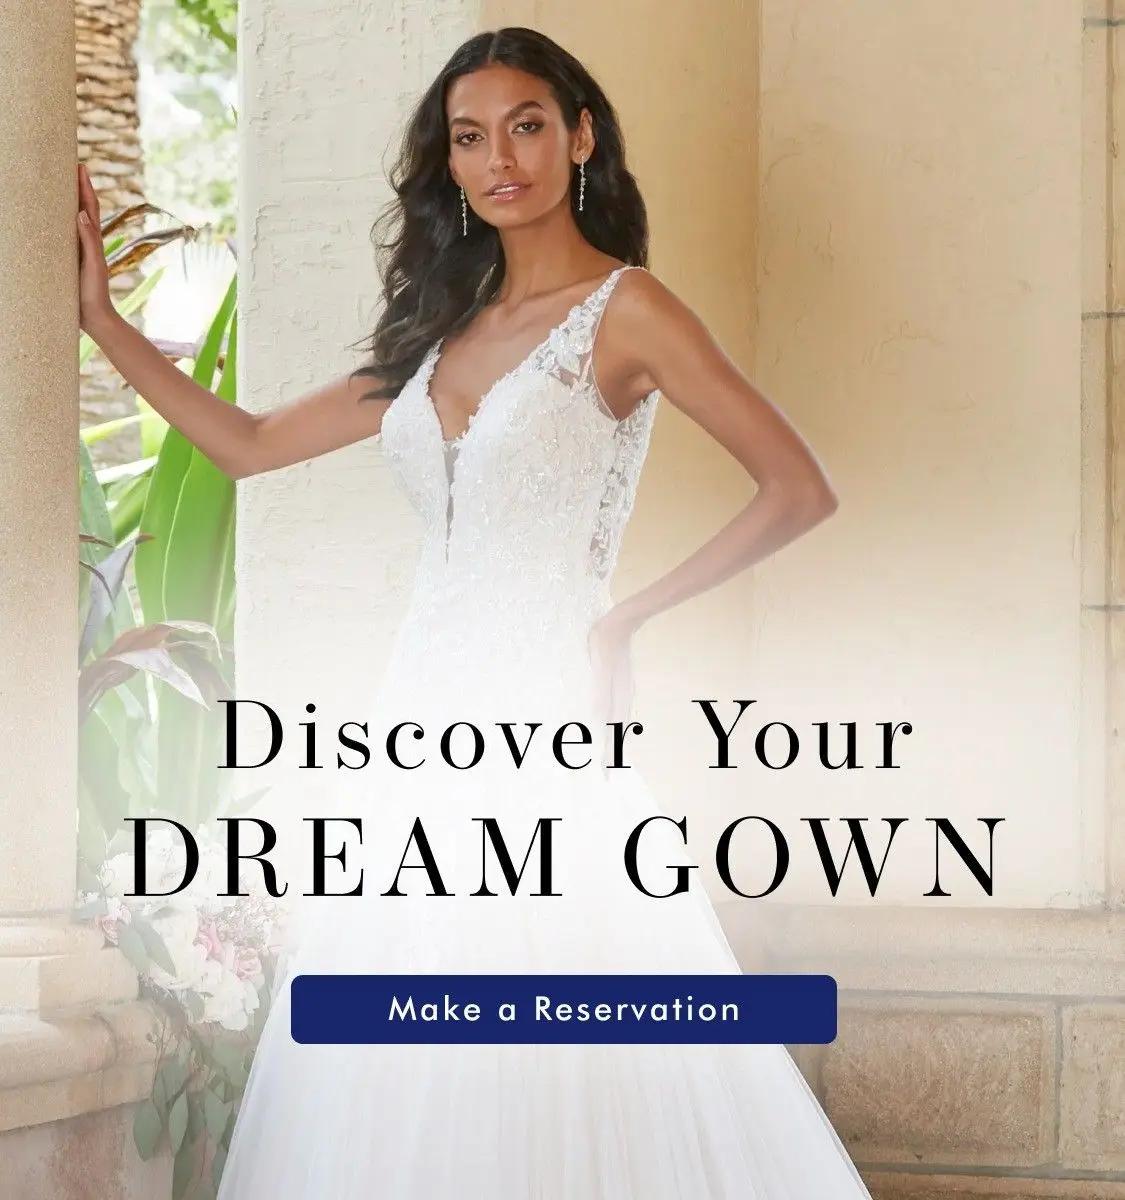 Discover Your Dream Gown mobile banner